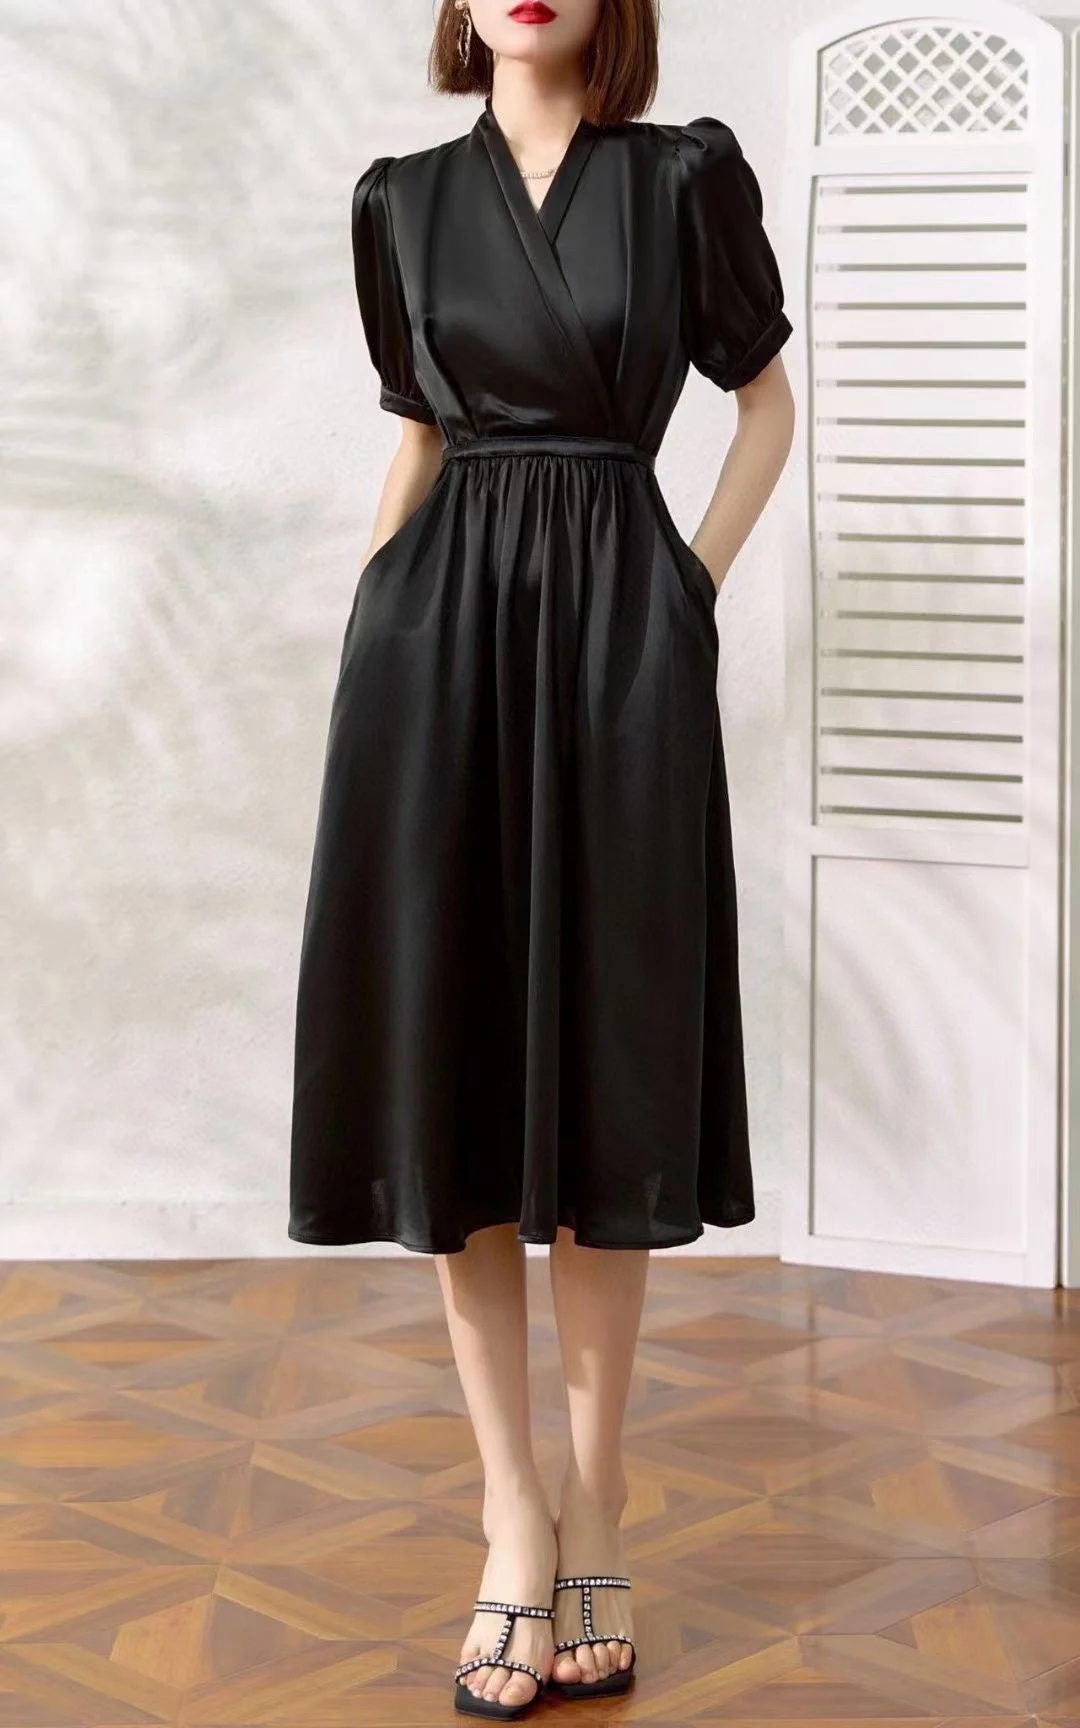 2023 spring and summer women's clothing fashion new V-neck Dress 0621